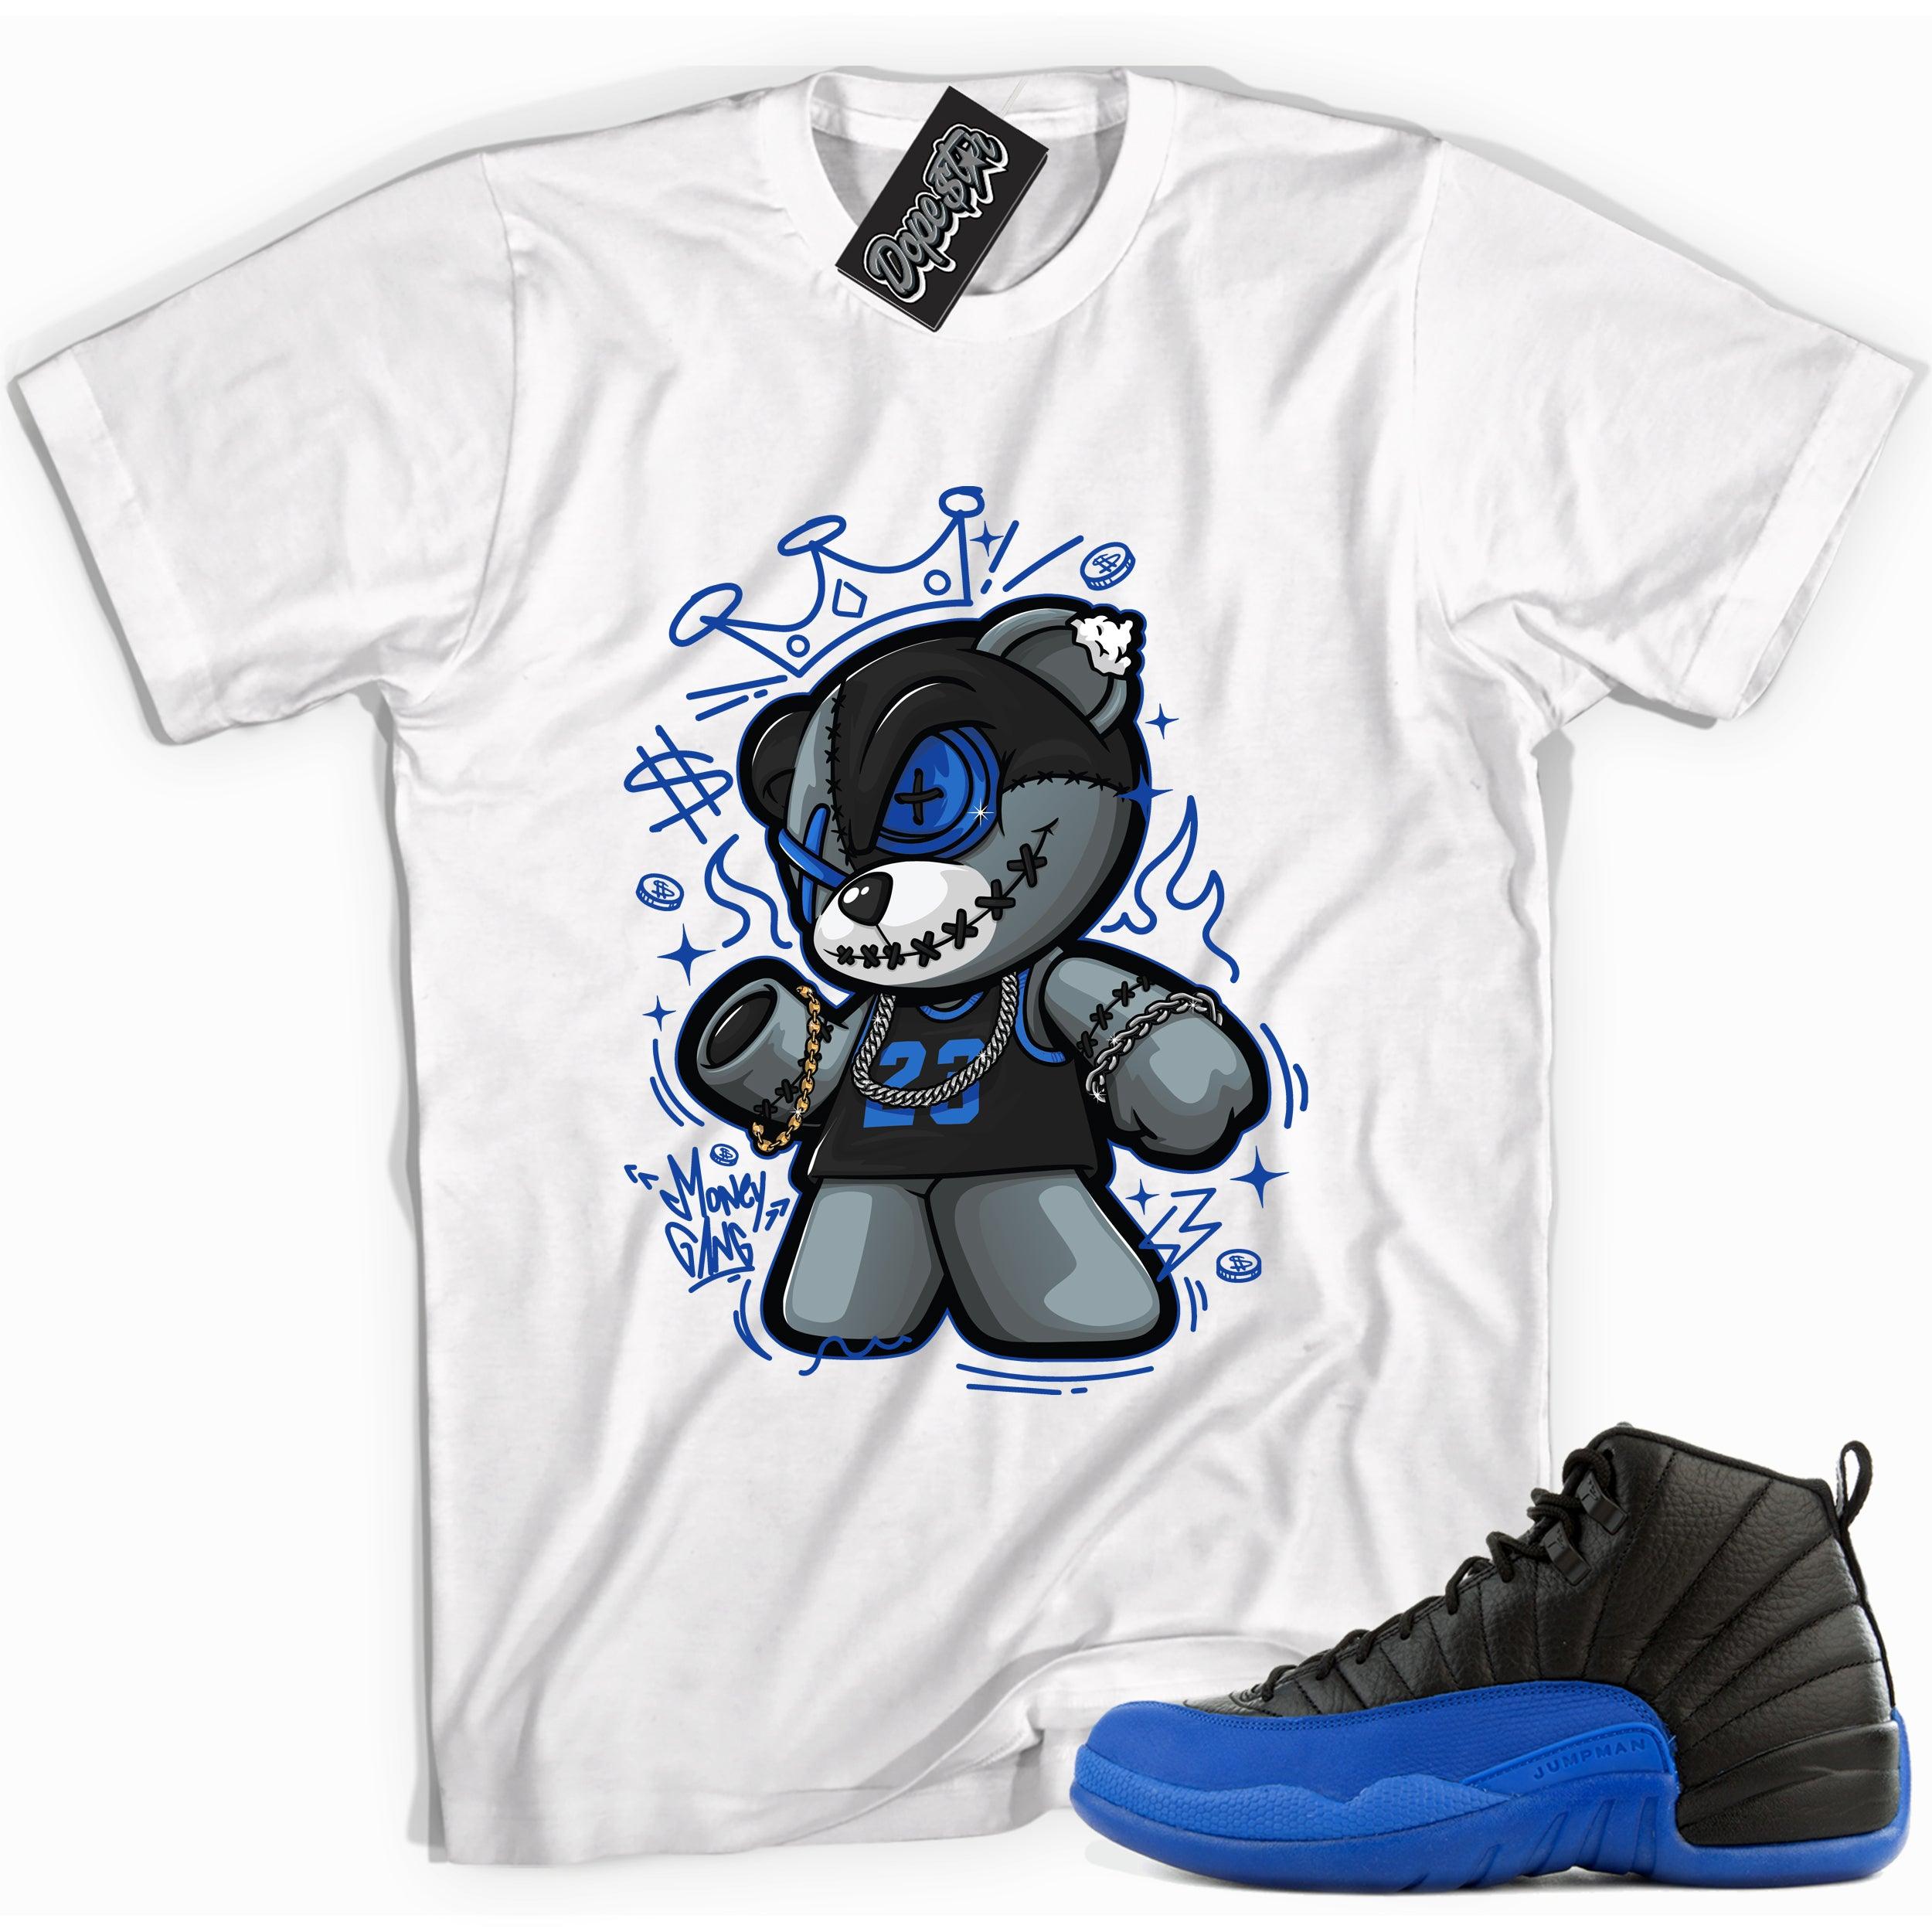 Cool white graphic tee with 'money gang bear' print, that perfectly matches Air Jordan 12 Retro Black Game Royal sneakers.